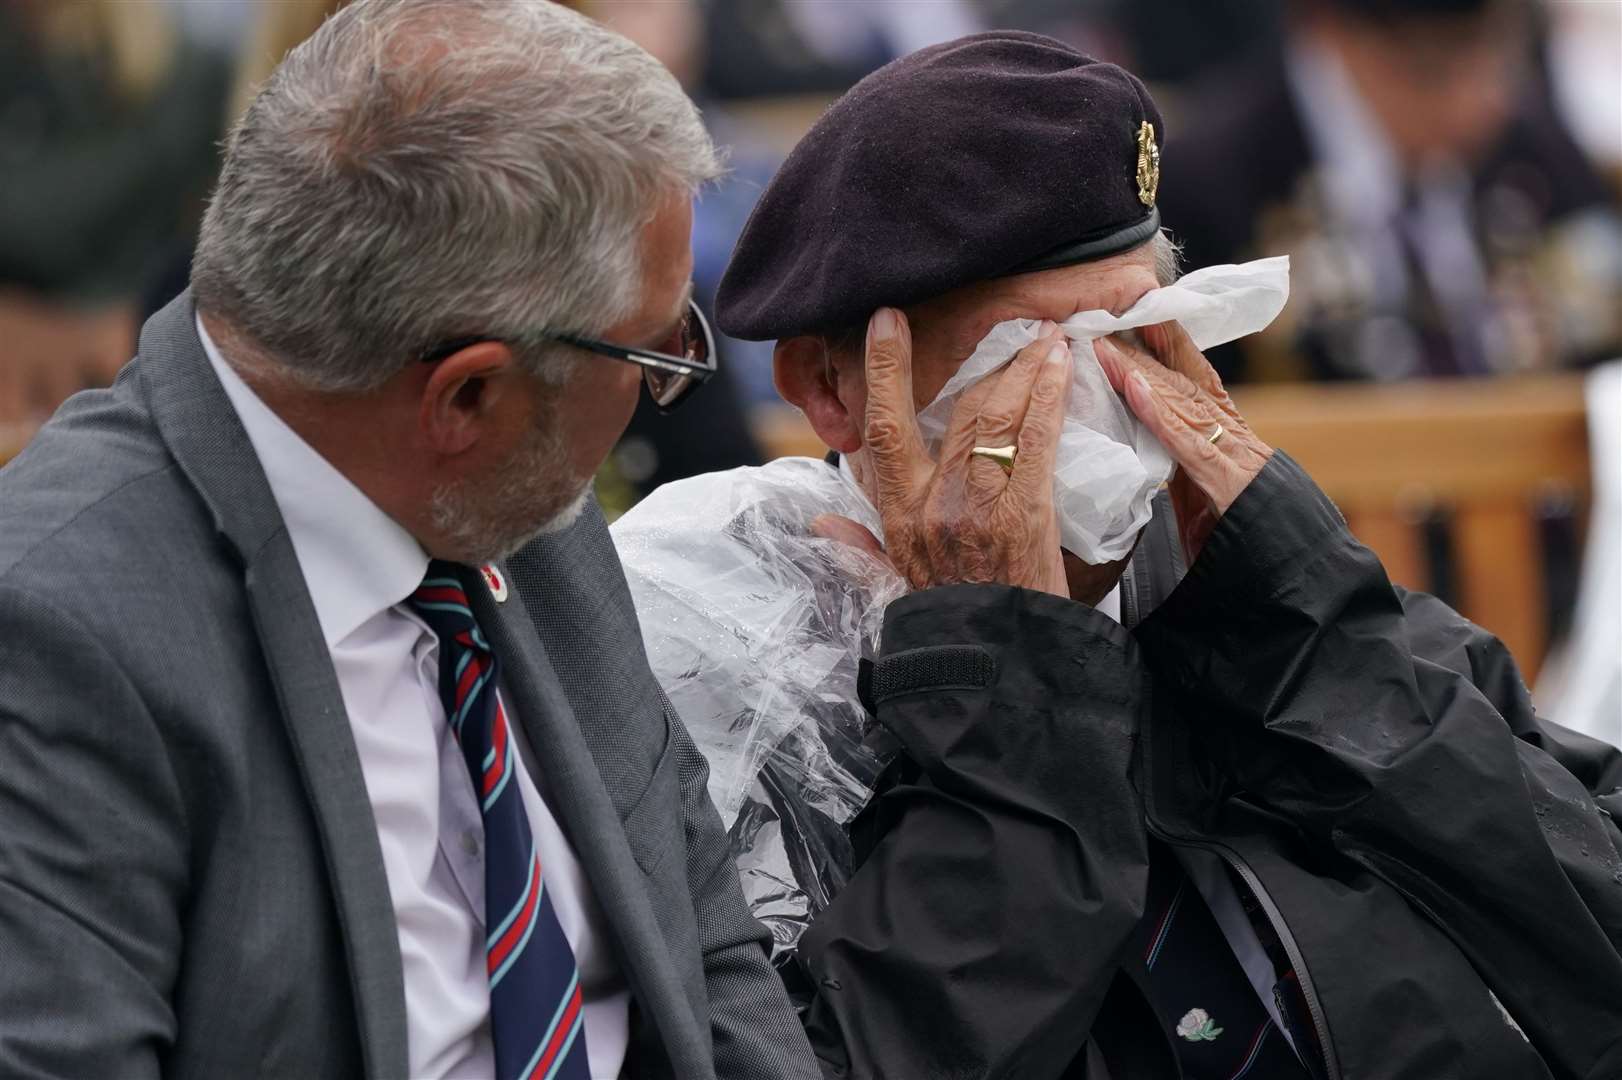 Veterans watch the official opening of the British Normandy Memorial via a live feed at the National Memorial Arboretum in Alrewas (Jacob King/PA)